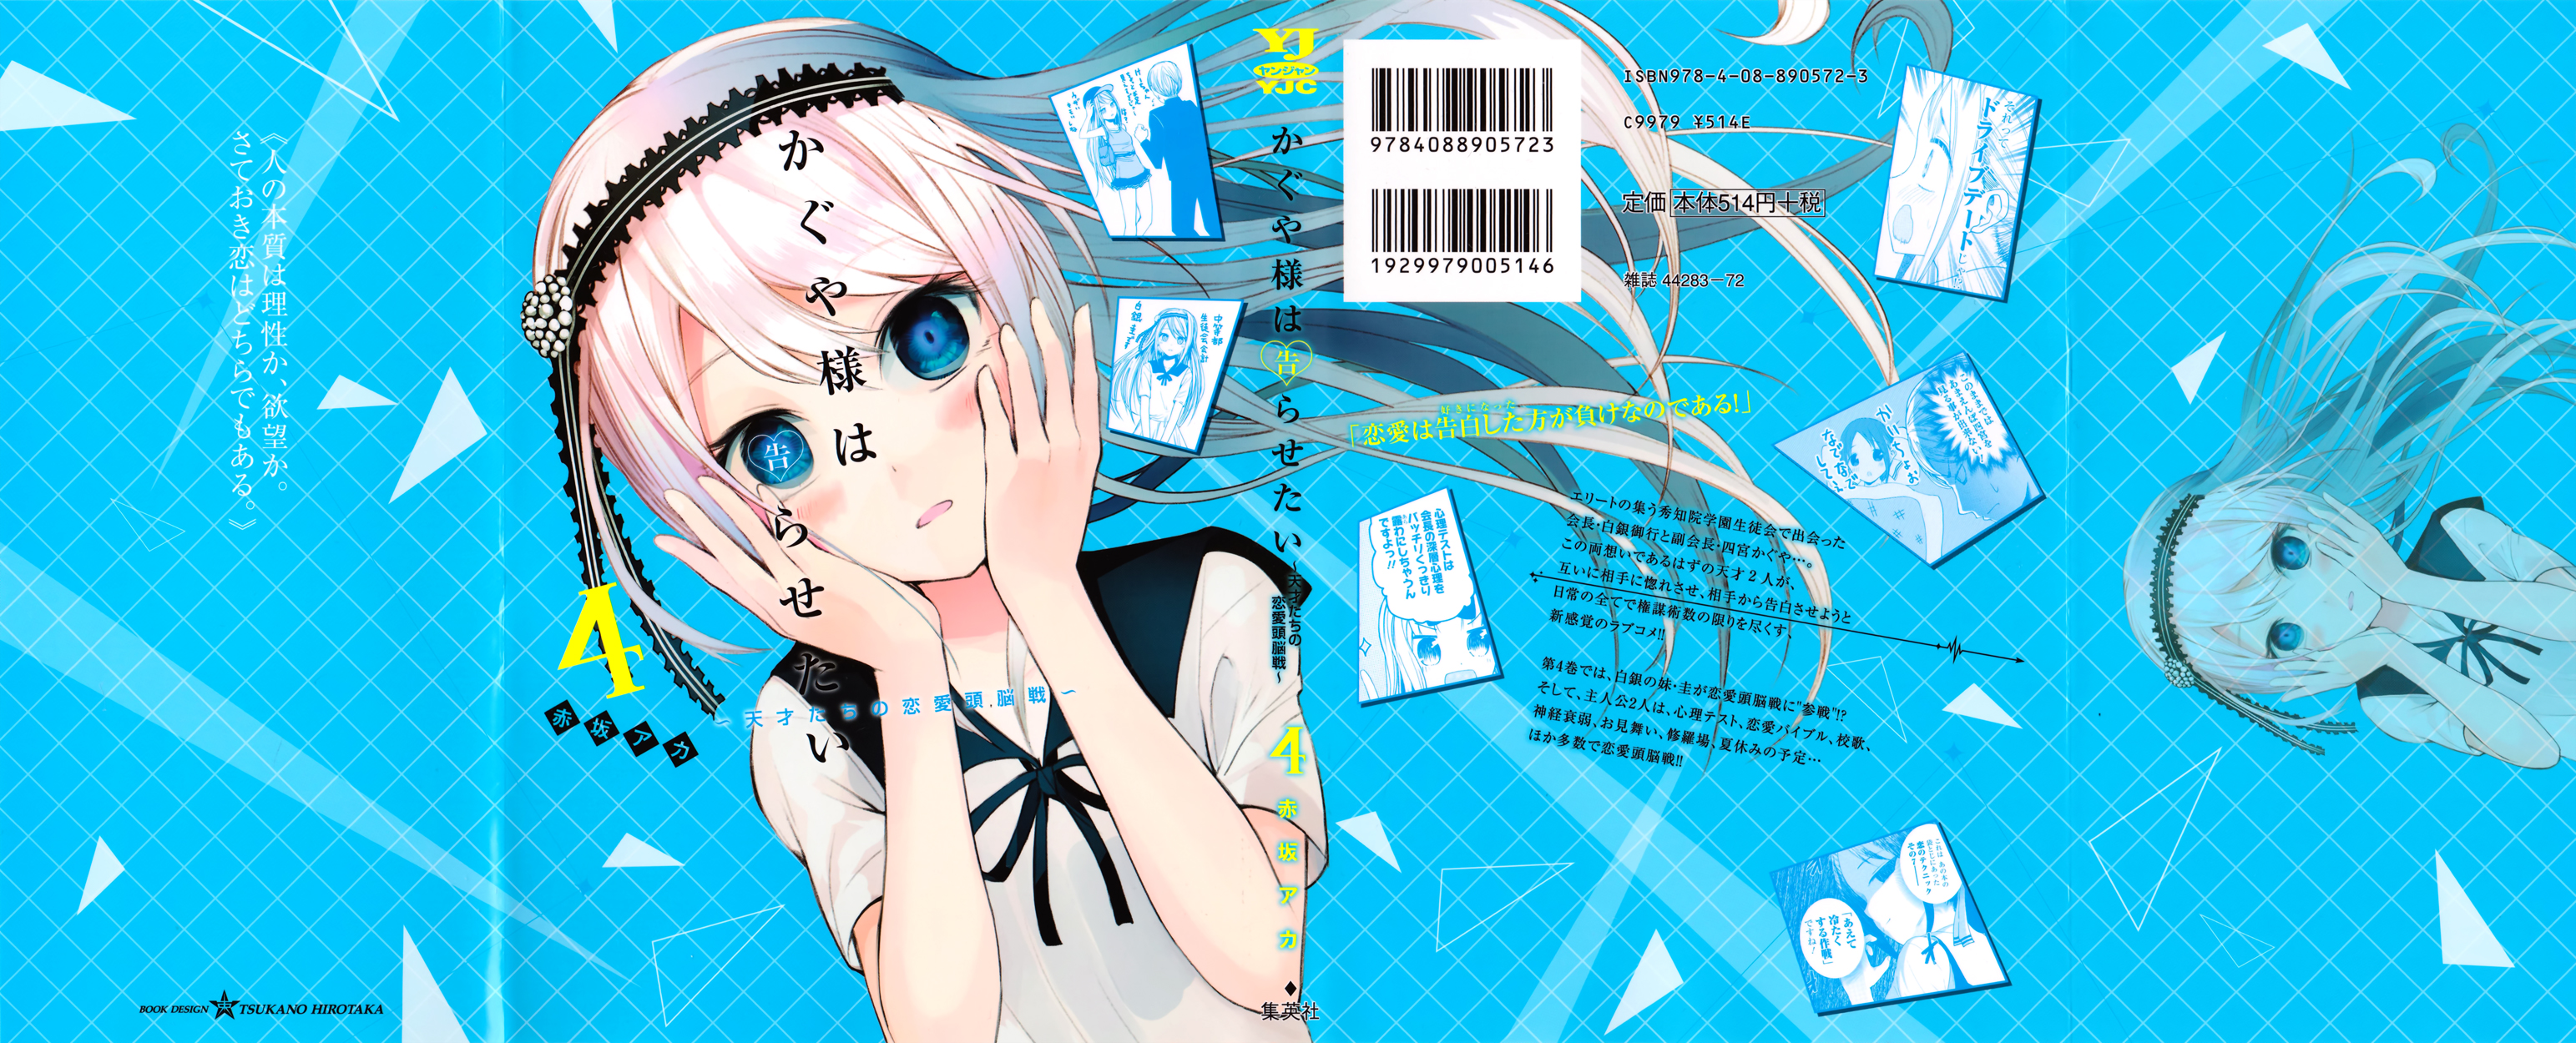 Kaguya Wants to be Confessed To: The Geniuses' War of Love and Brains Vol.4 Ch.40.5